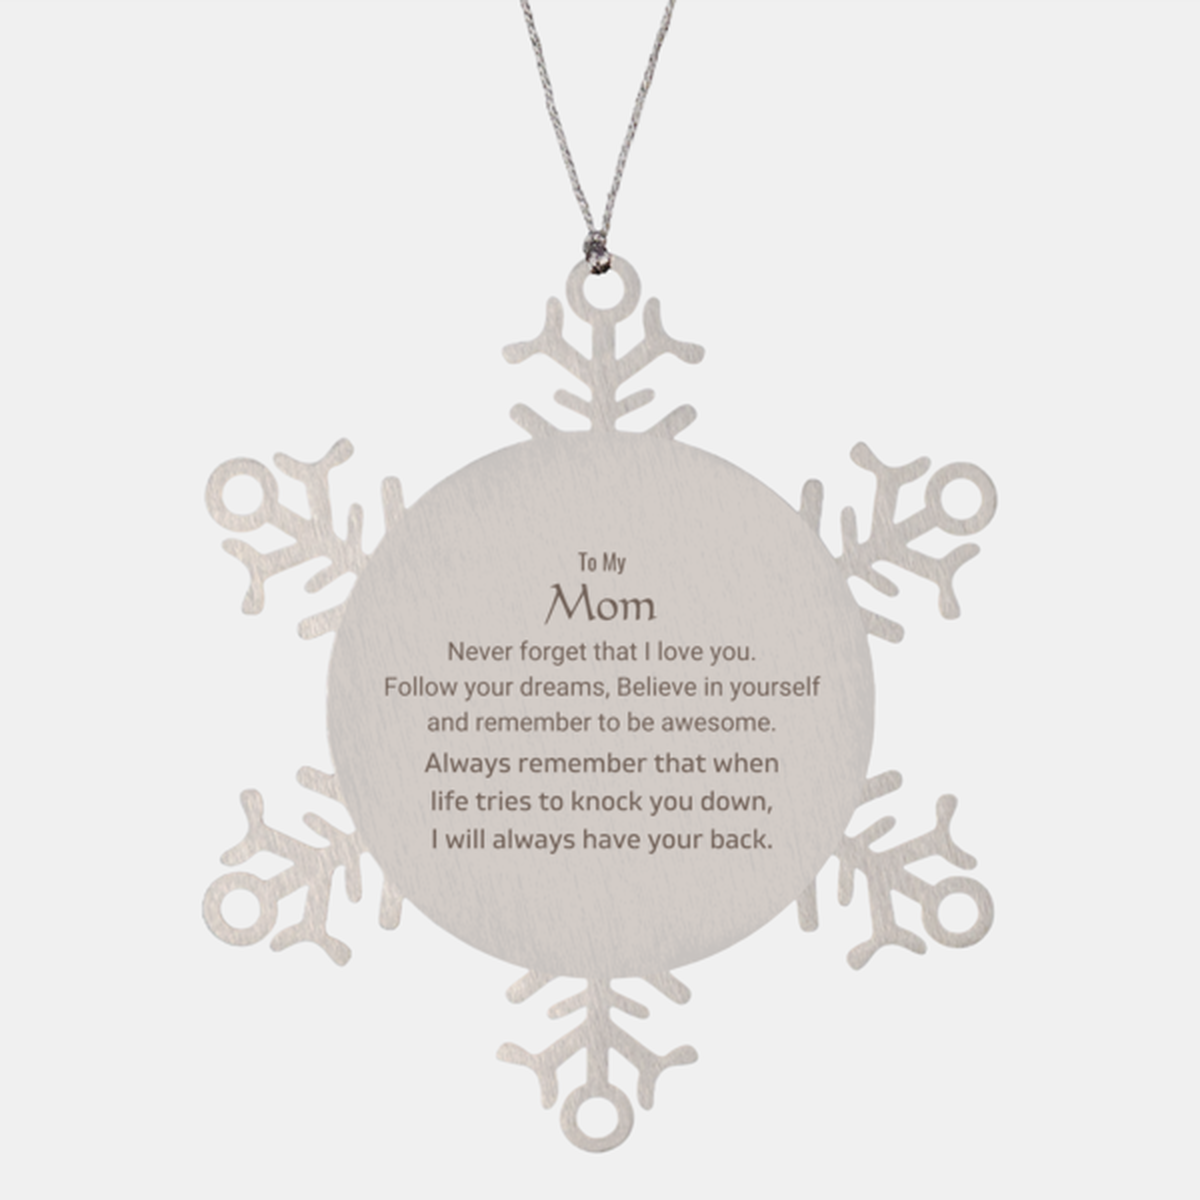 Inspirational Gifts for Mom, Follow your dreams, Believe in yourself, Mom Snowflake Ornament, Birthday Christmas Unique Gifts For Mom